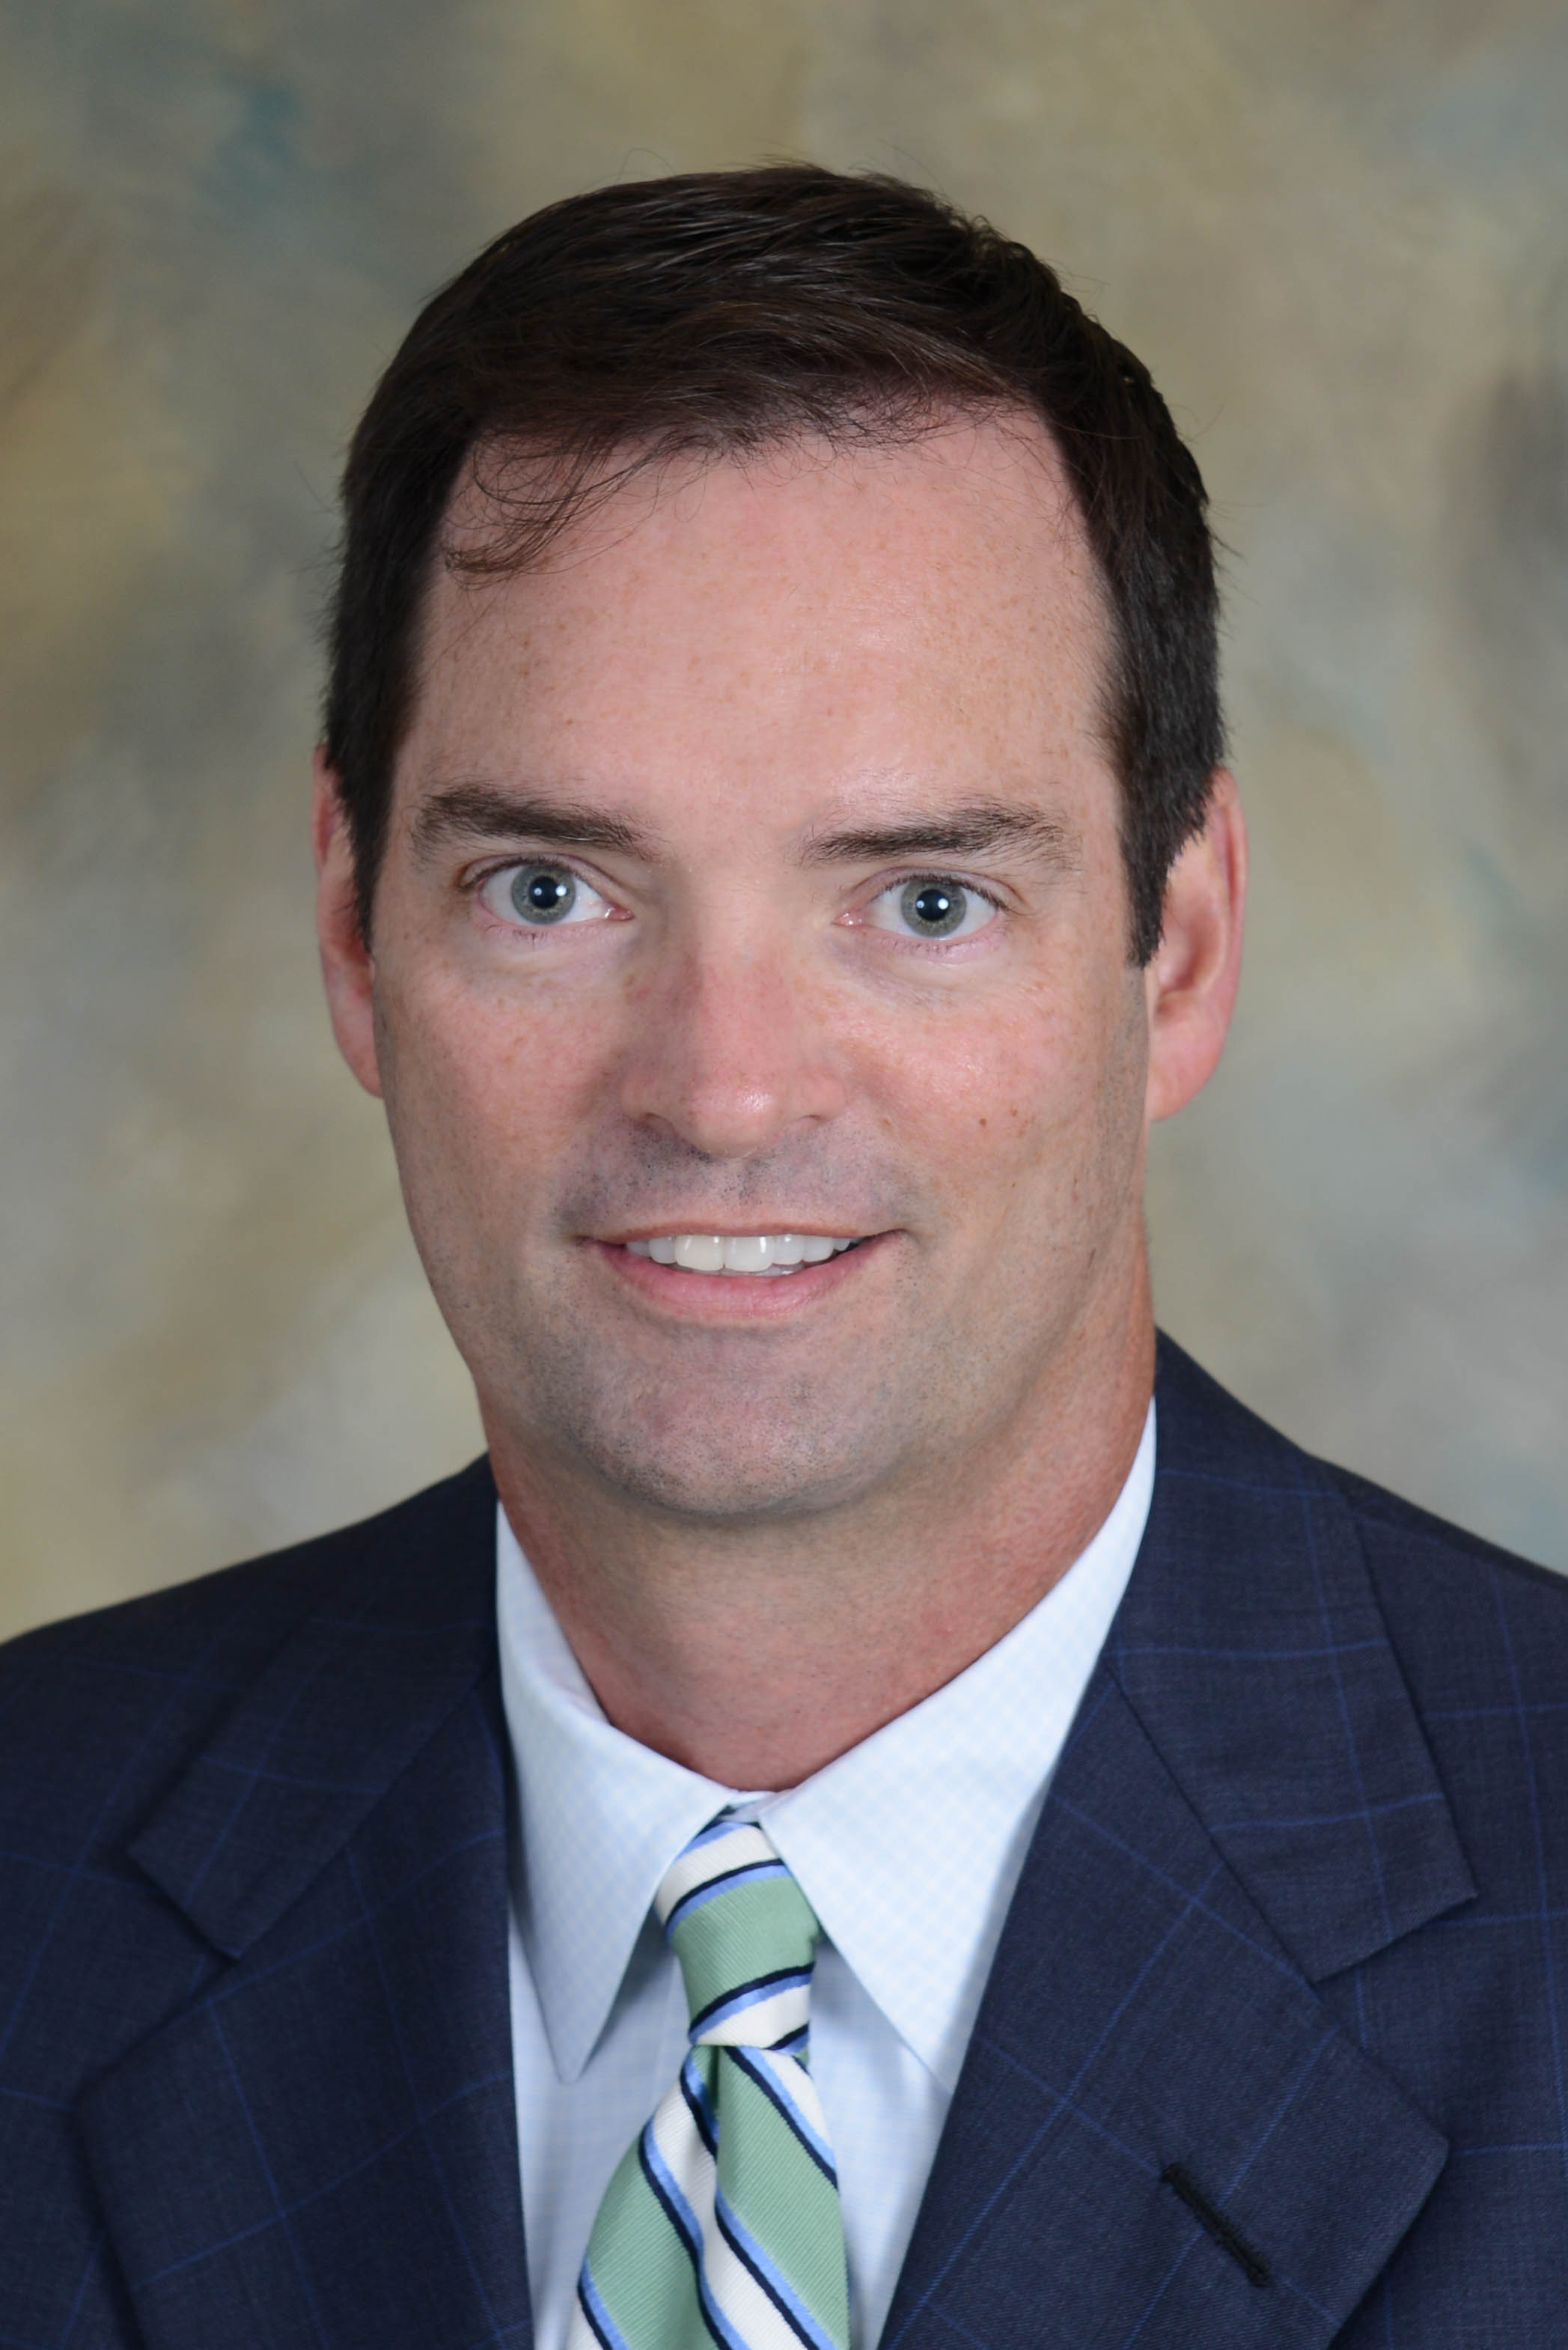 Tom Hutchens is Senior Vice President of Sales and Marketing at Angel Oak Mortgage Solutions